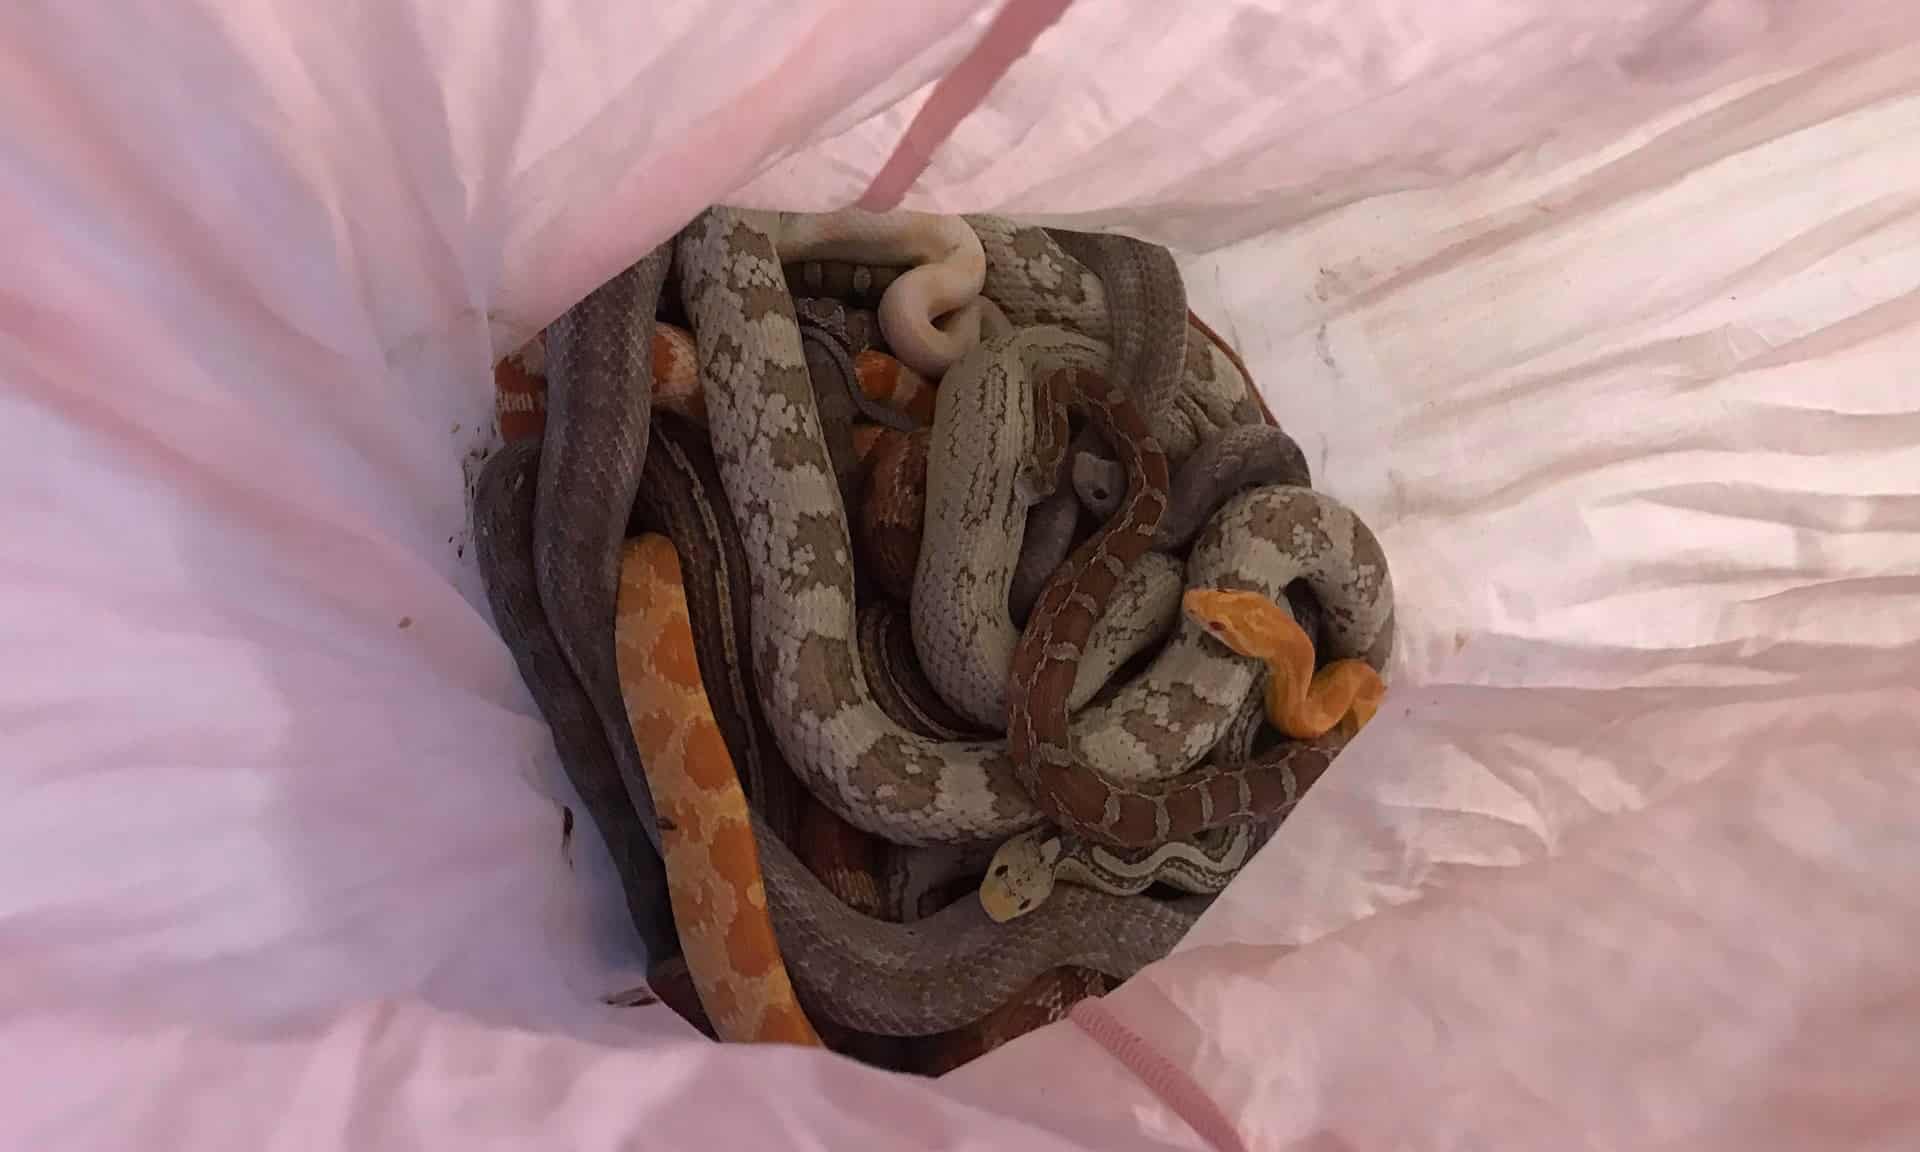 Another 16 Snakes Found Abandoned Behind Fire Station in Sunderland, England